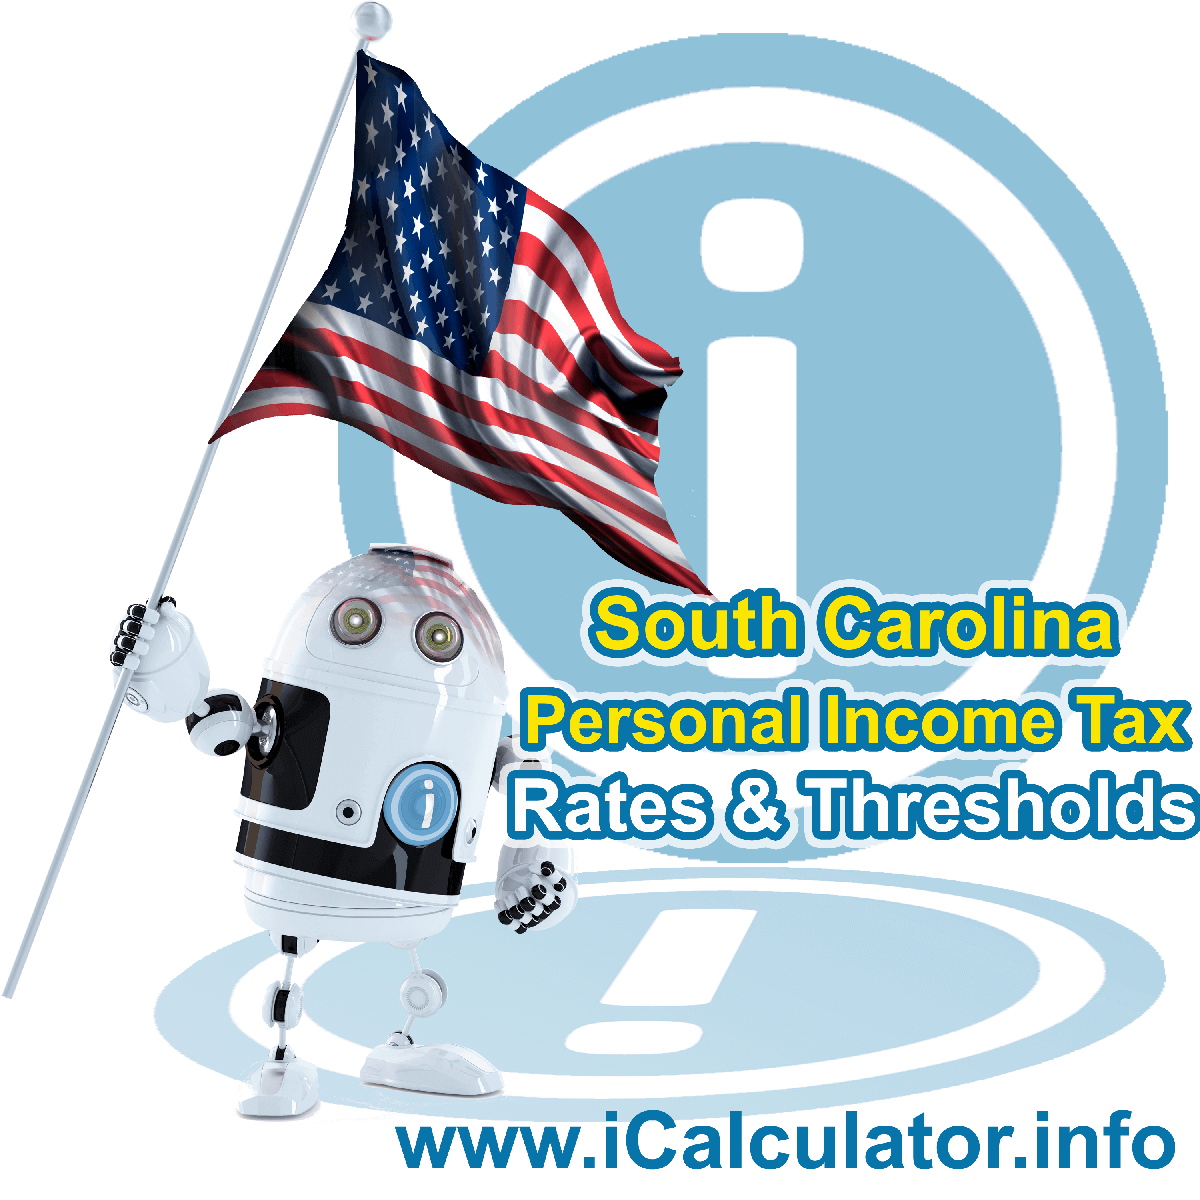 South Carolina State Tax Tables 2022. This image displays details of the South Carolina State Tax Tables for the 2022 tax return year which is provided in support of the 2022 US Tax Calculator